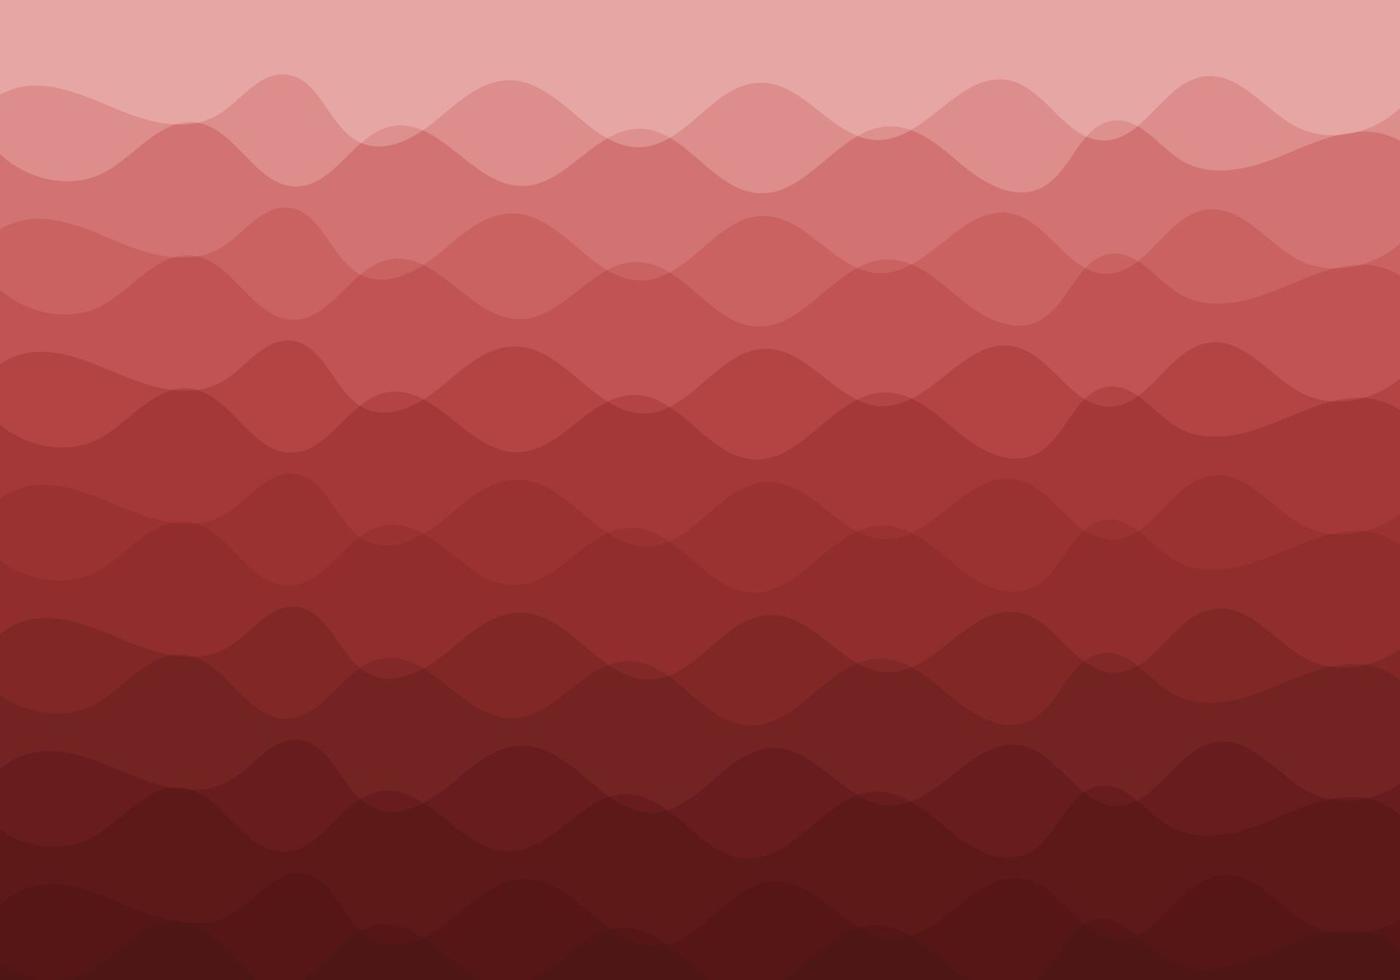 An abstract background composed of overlapping wavy lines. Gradient from light red to dark vector